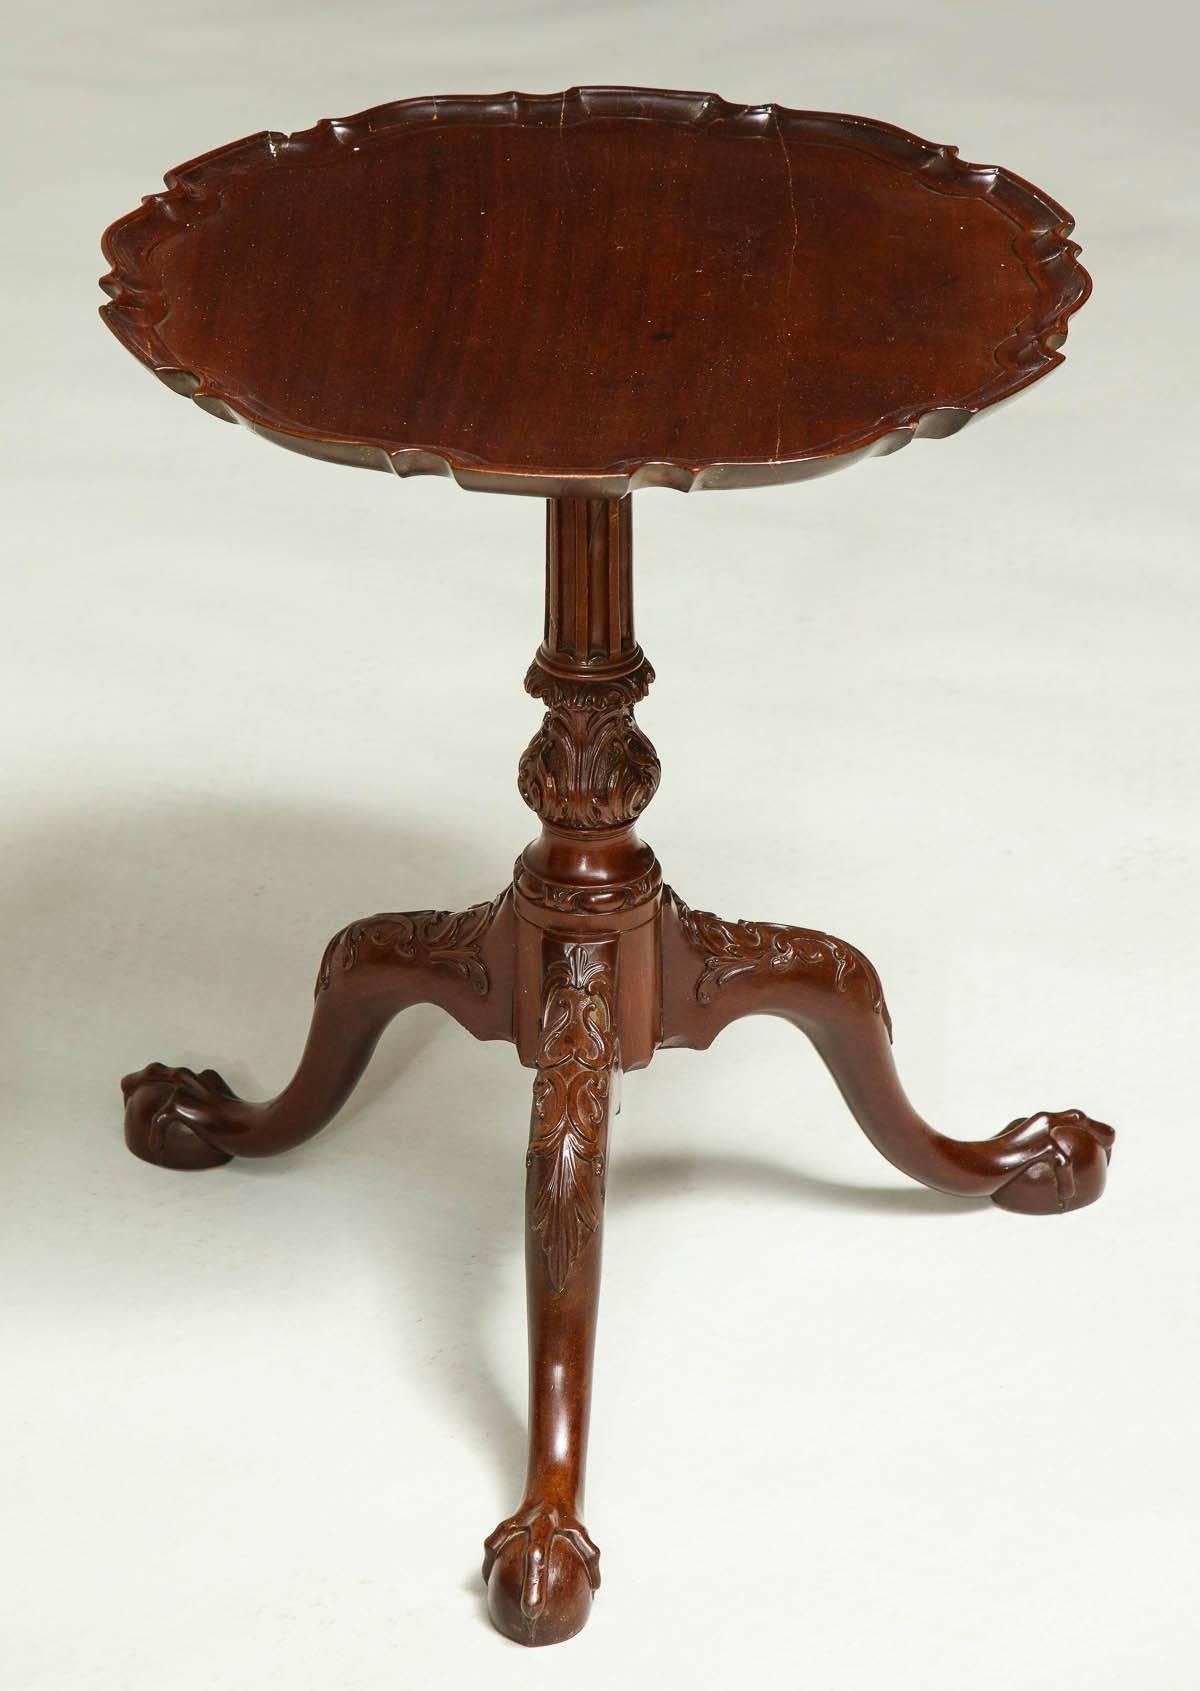 Very fine George II pie crust tripod table, the single board top with scalloped and dished surface, over turned and fluted shaft with acanthus carved stem, the legs with foliage carving over well formed ball and claw feet, exceptionally carved, the